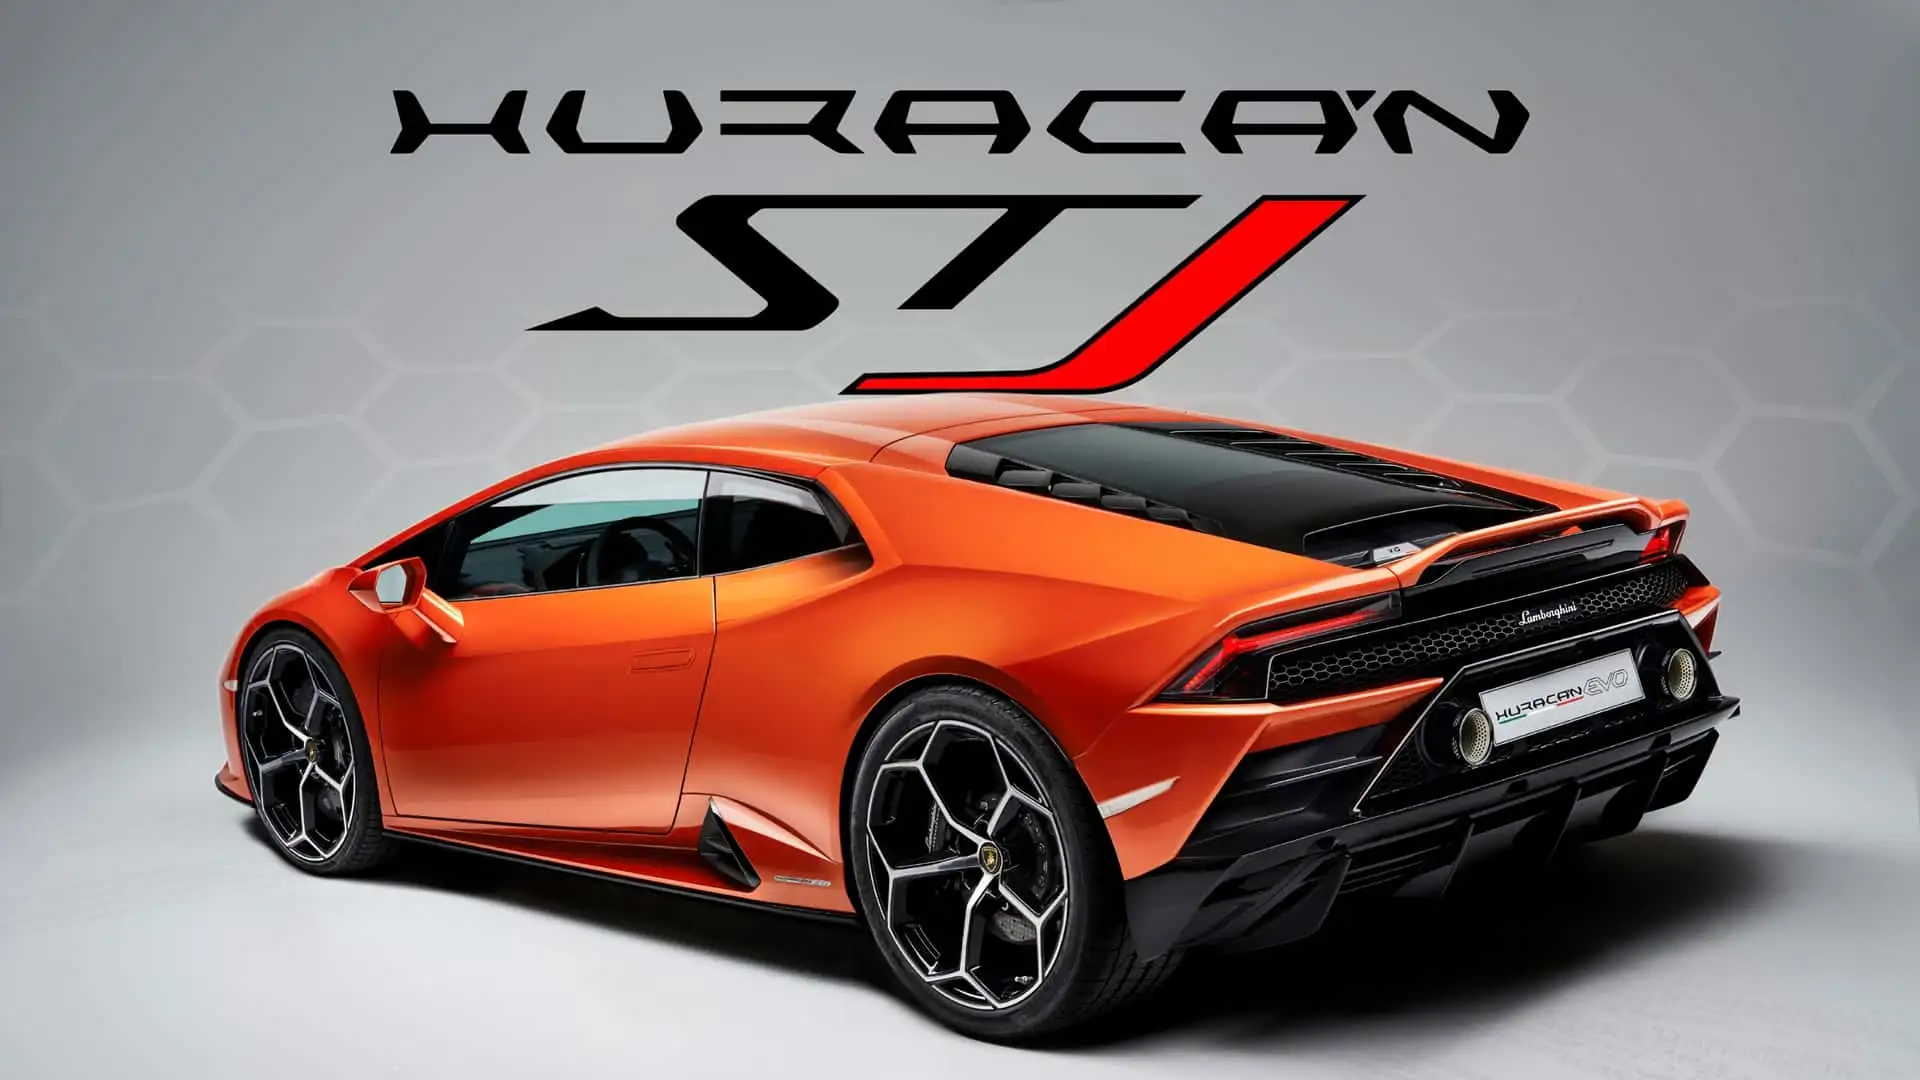 Speculation: Complete Allocation of 10 Lamborghini Huracan STJ Supercars Sold Out